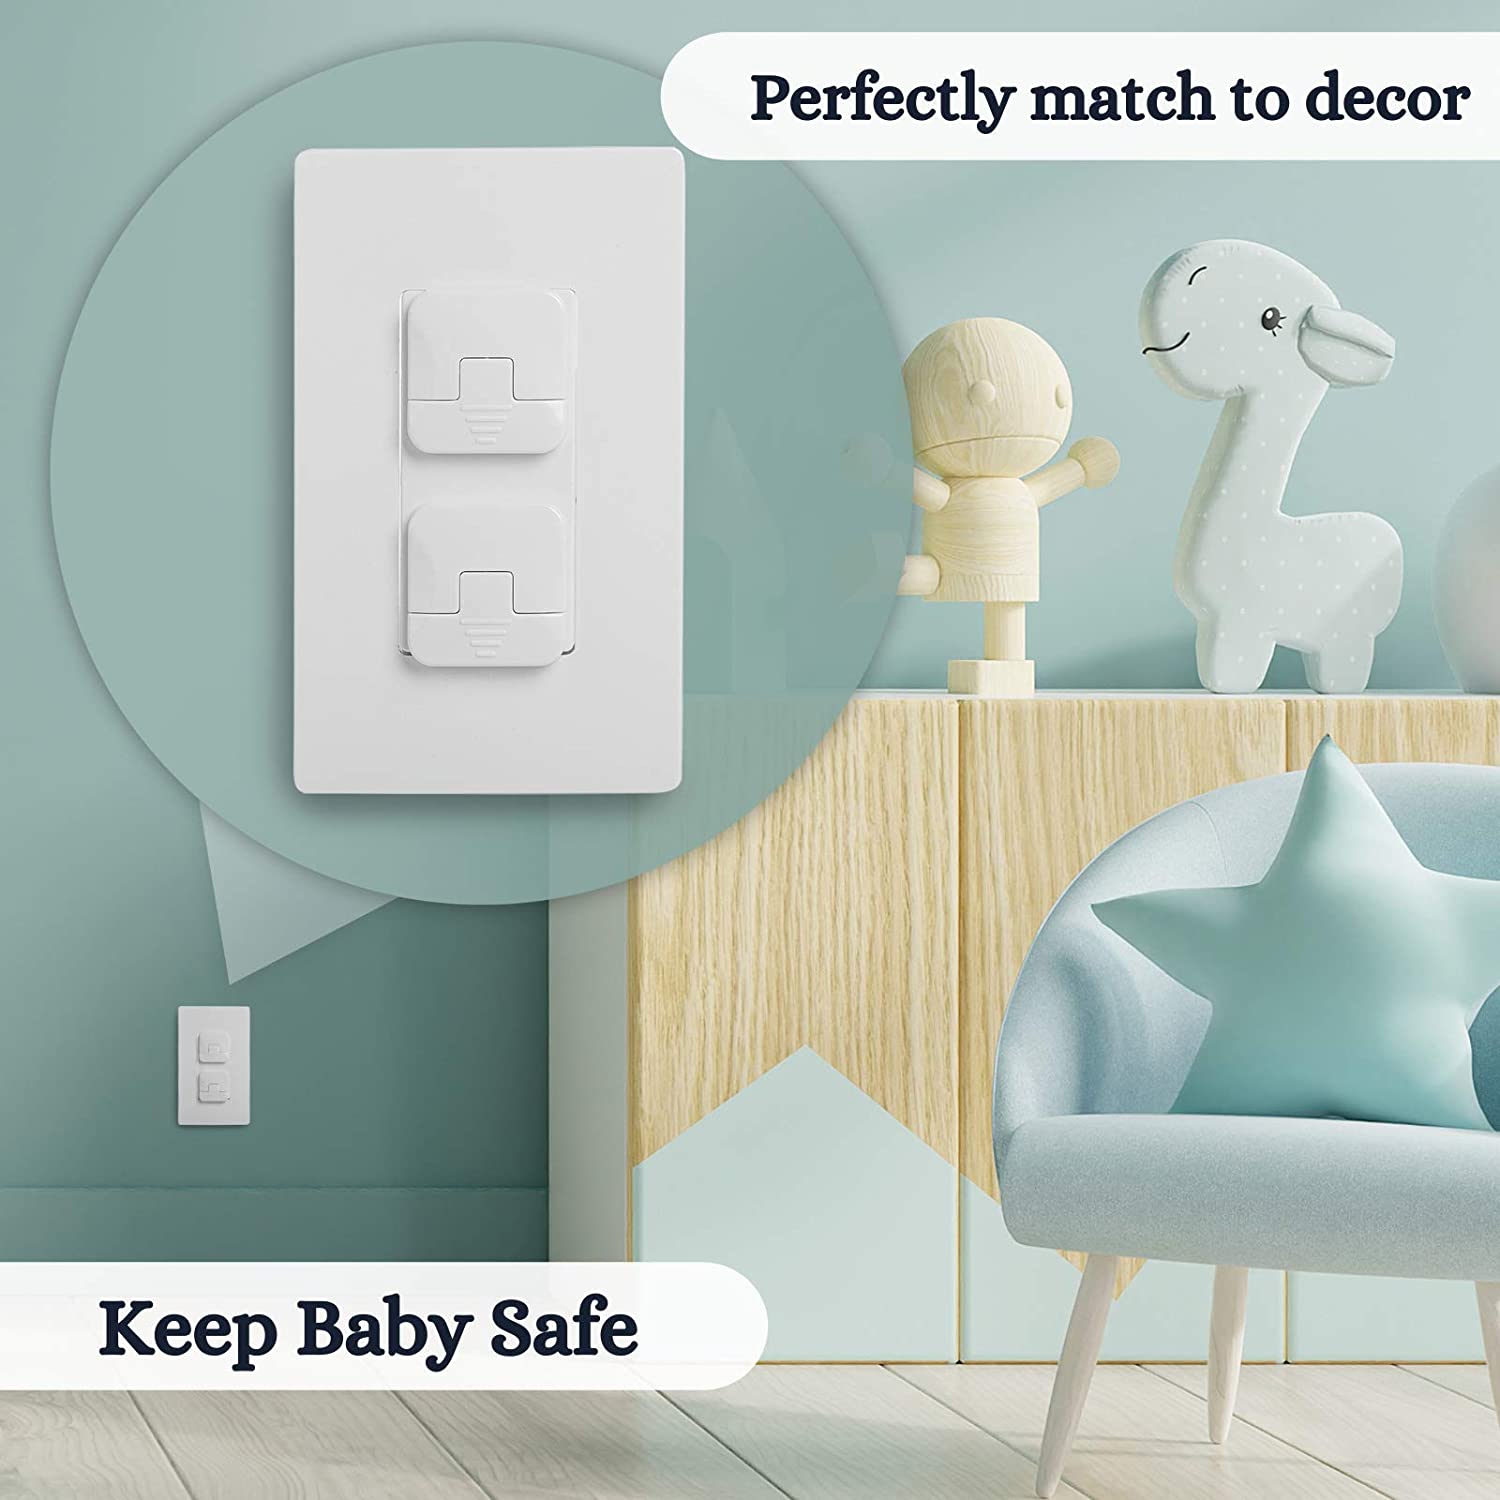 Bates - Baby Safety Outlet Cover Box, Outlet Covers Baby Proofing, Plug Covers for Electrical Outlets, Baby Proof Outlet Covers, Socket Covers for